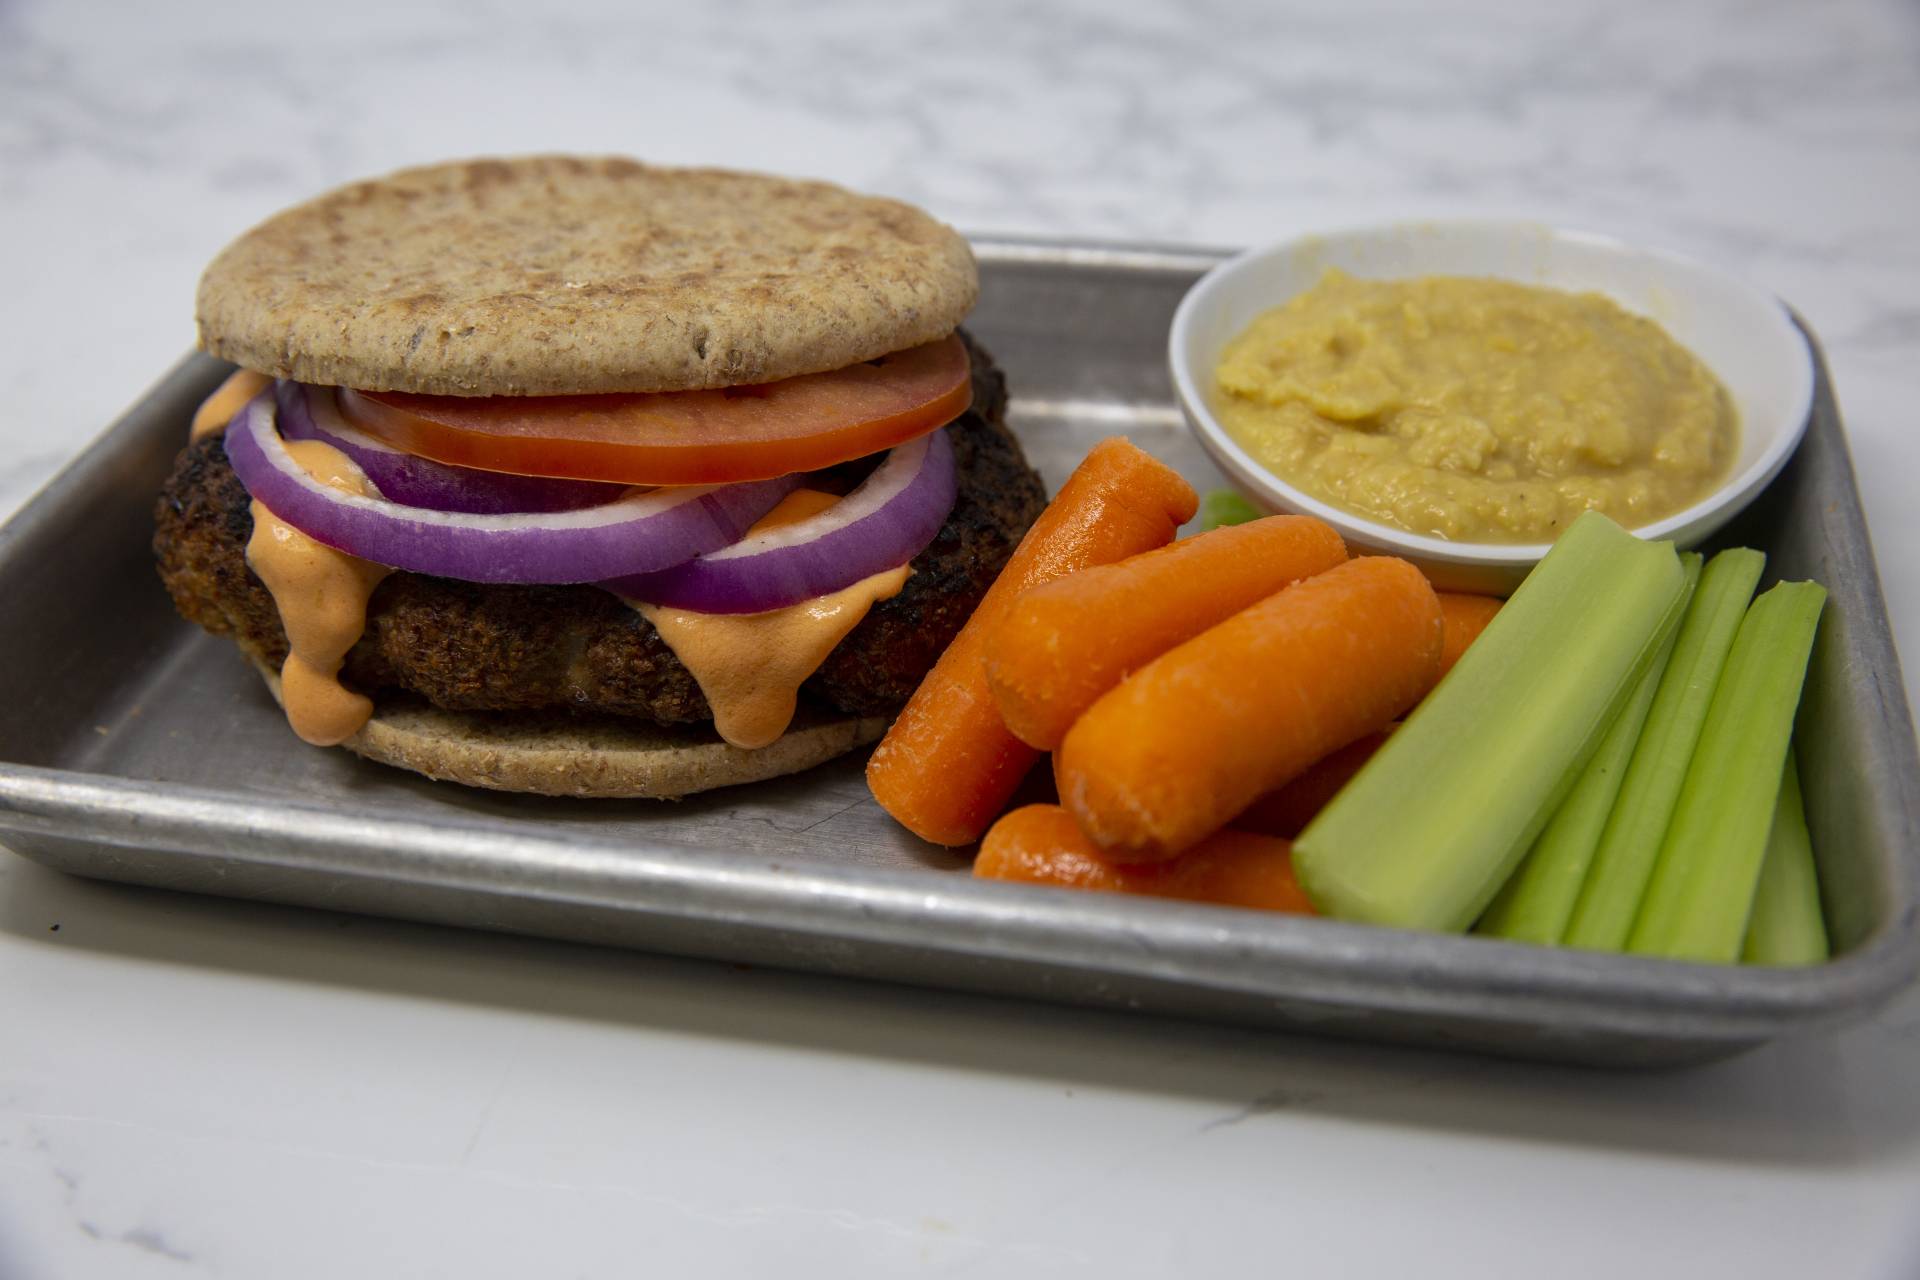 Buffalo Turkey Burger with Hummus and Vegetables.